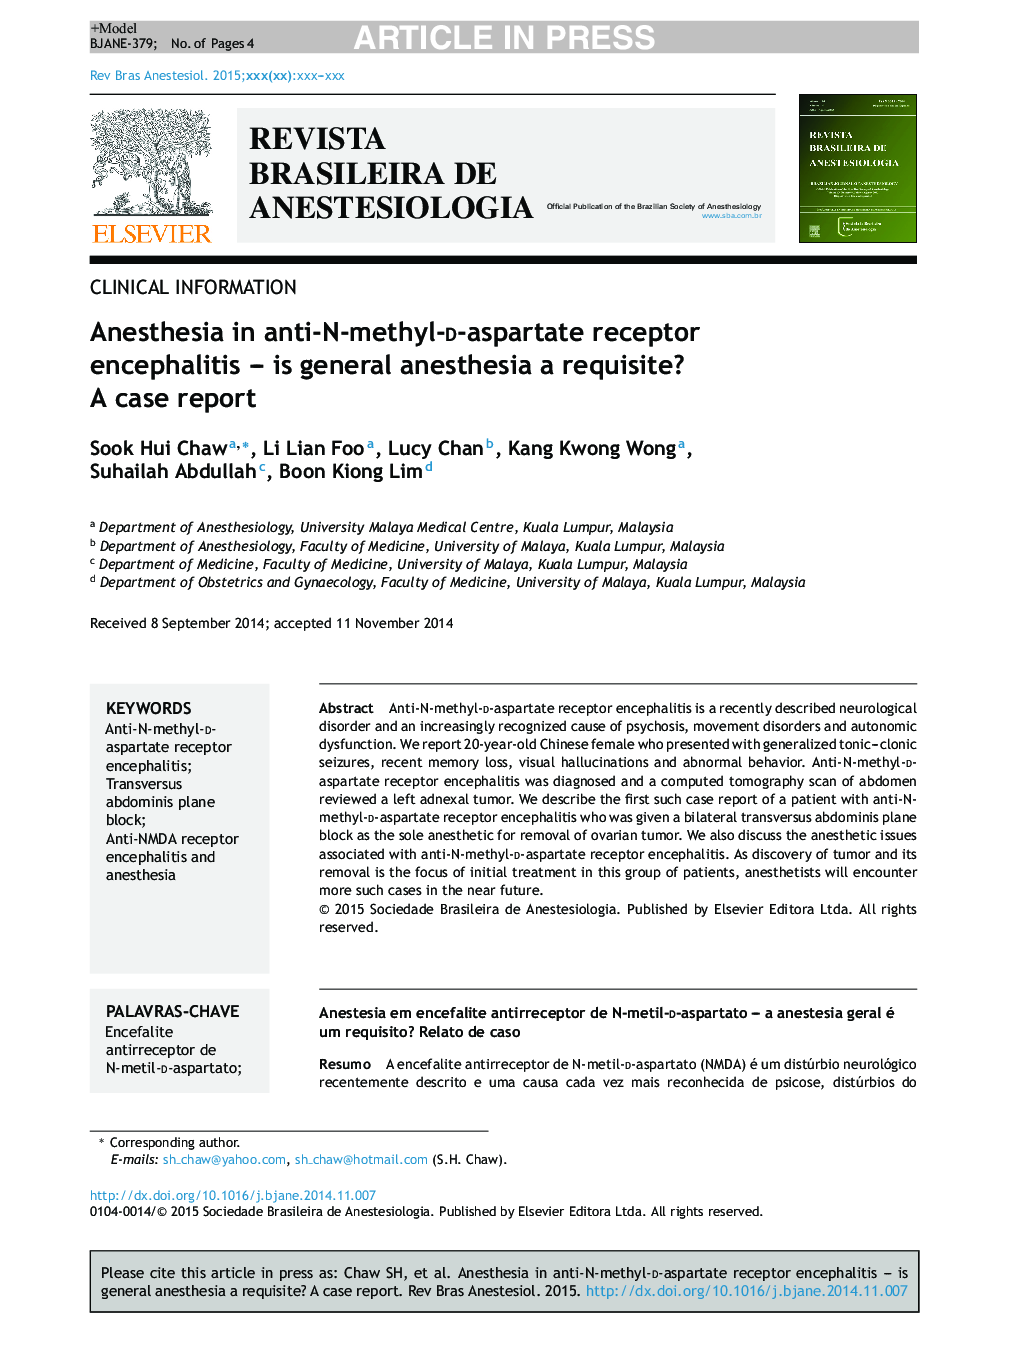 Anesthesia in anti-N-methyl-d-aspartate receptor encephalitis - is general anesthesia a requisite? A case report